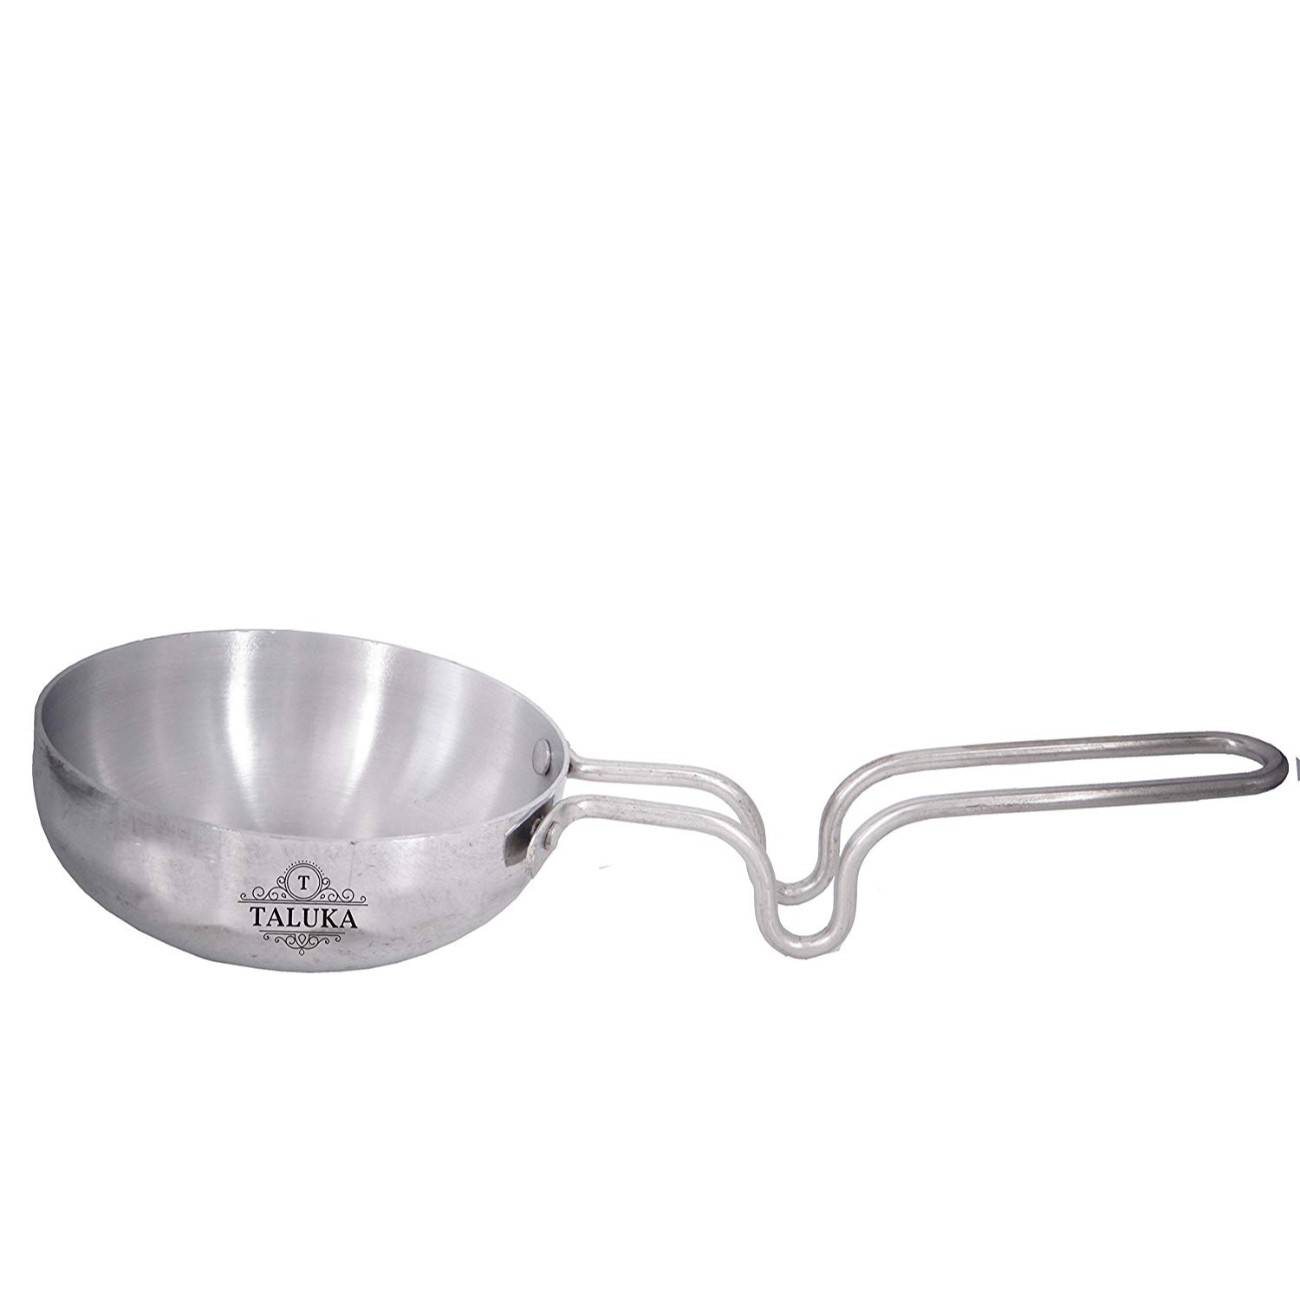 Aluminium Silver Tadka Pan for Cooking Purpose Hotel Home Restaurant 4.8" inch Approx